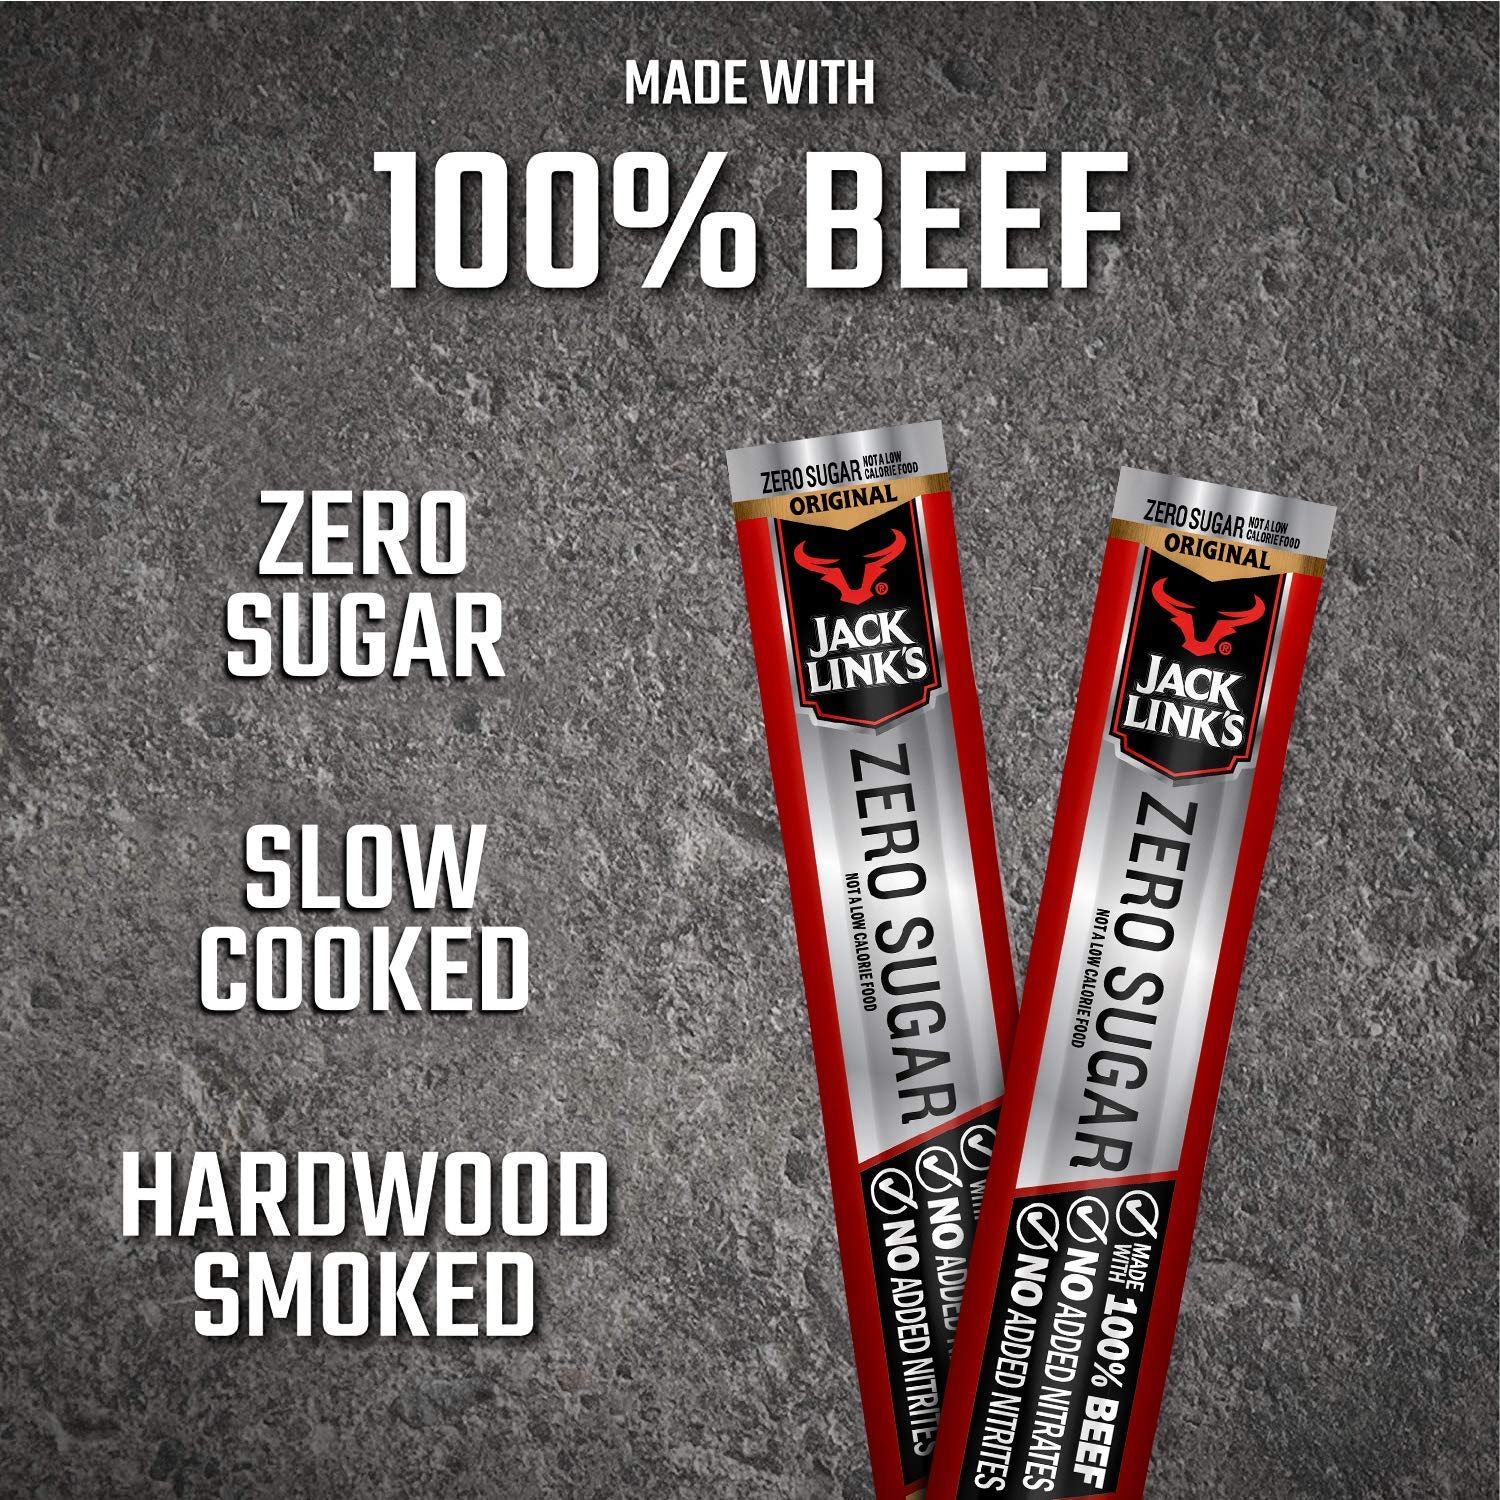 Jack Link's Zero Sugar Beef Sticks, .92 oz, 20 pack, as low as $11.14 with Amazon S & S and Coupon